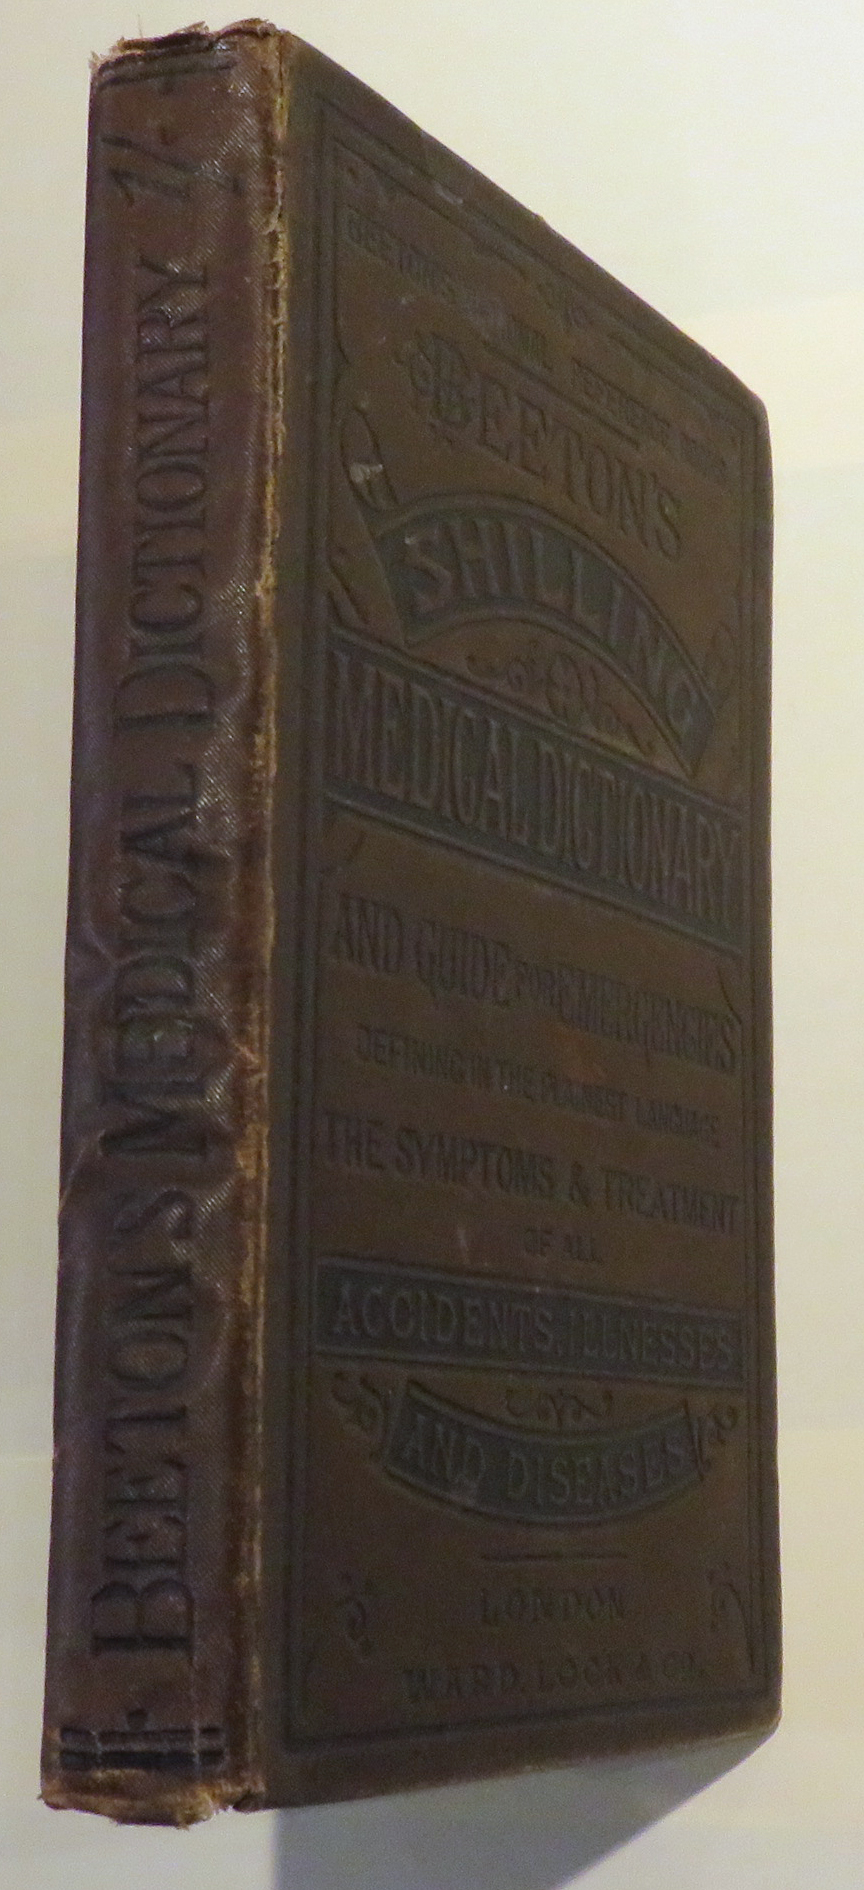 Beeton's Medical Dictionary, A Safe Guide for Every Family. Beeton's Shilling Books 